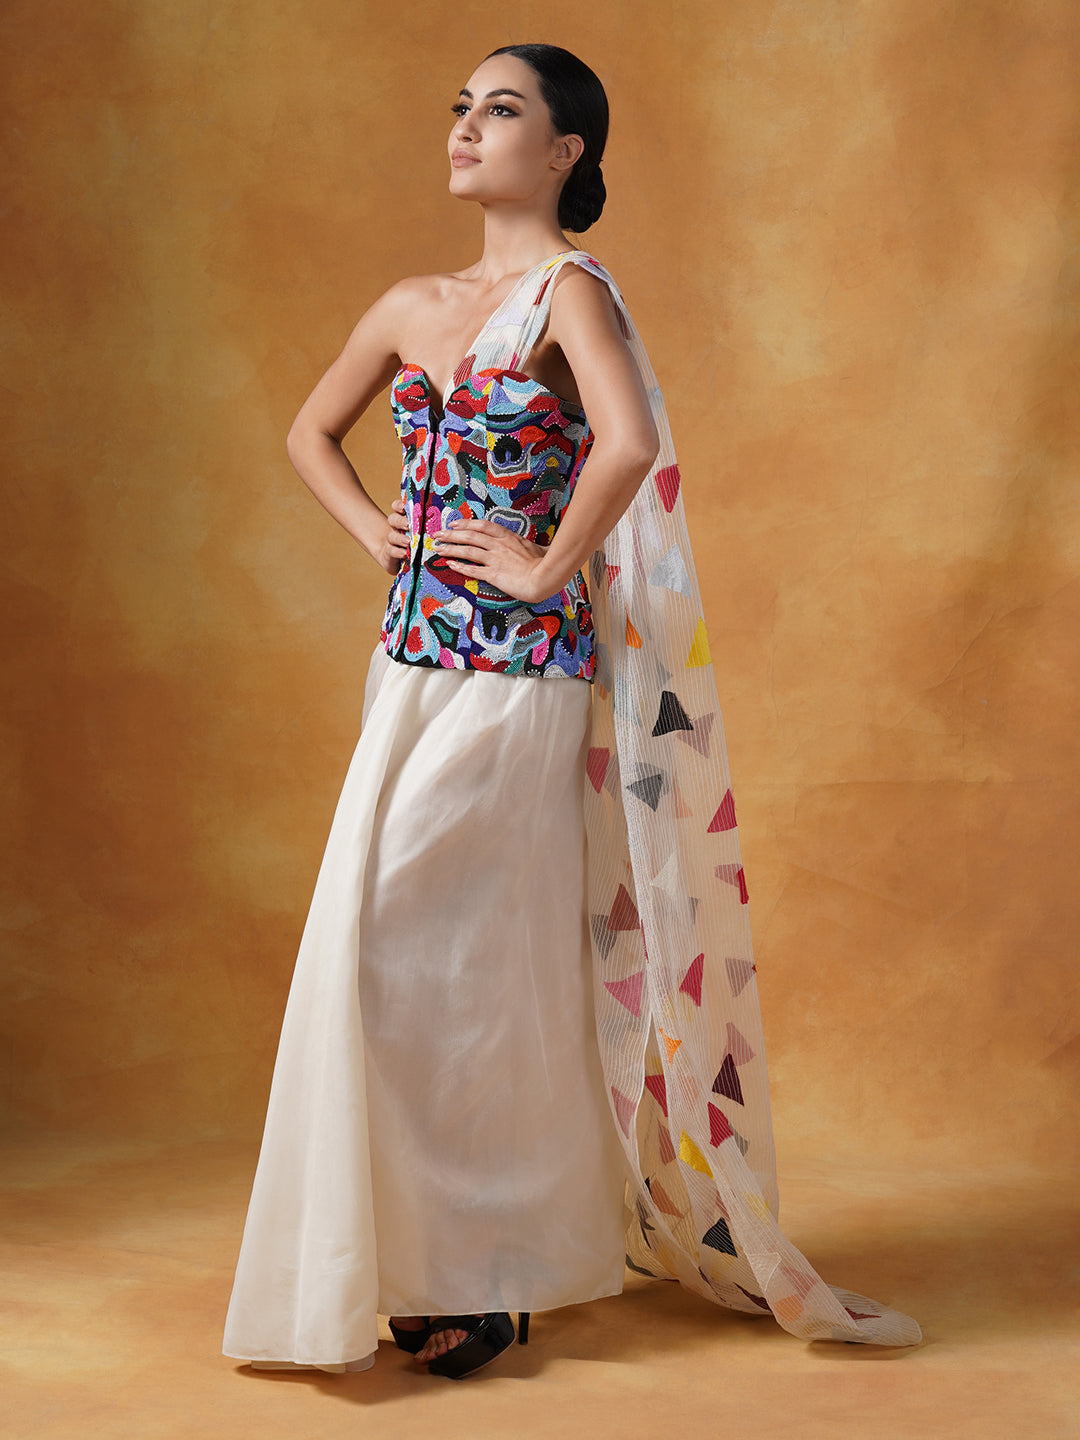 Corset that is intricately embroidered in colorful beads, decorated with a printed pallu and is paired with a plain white cotton silk drape skirt.